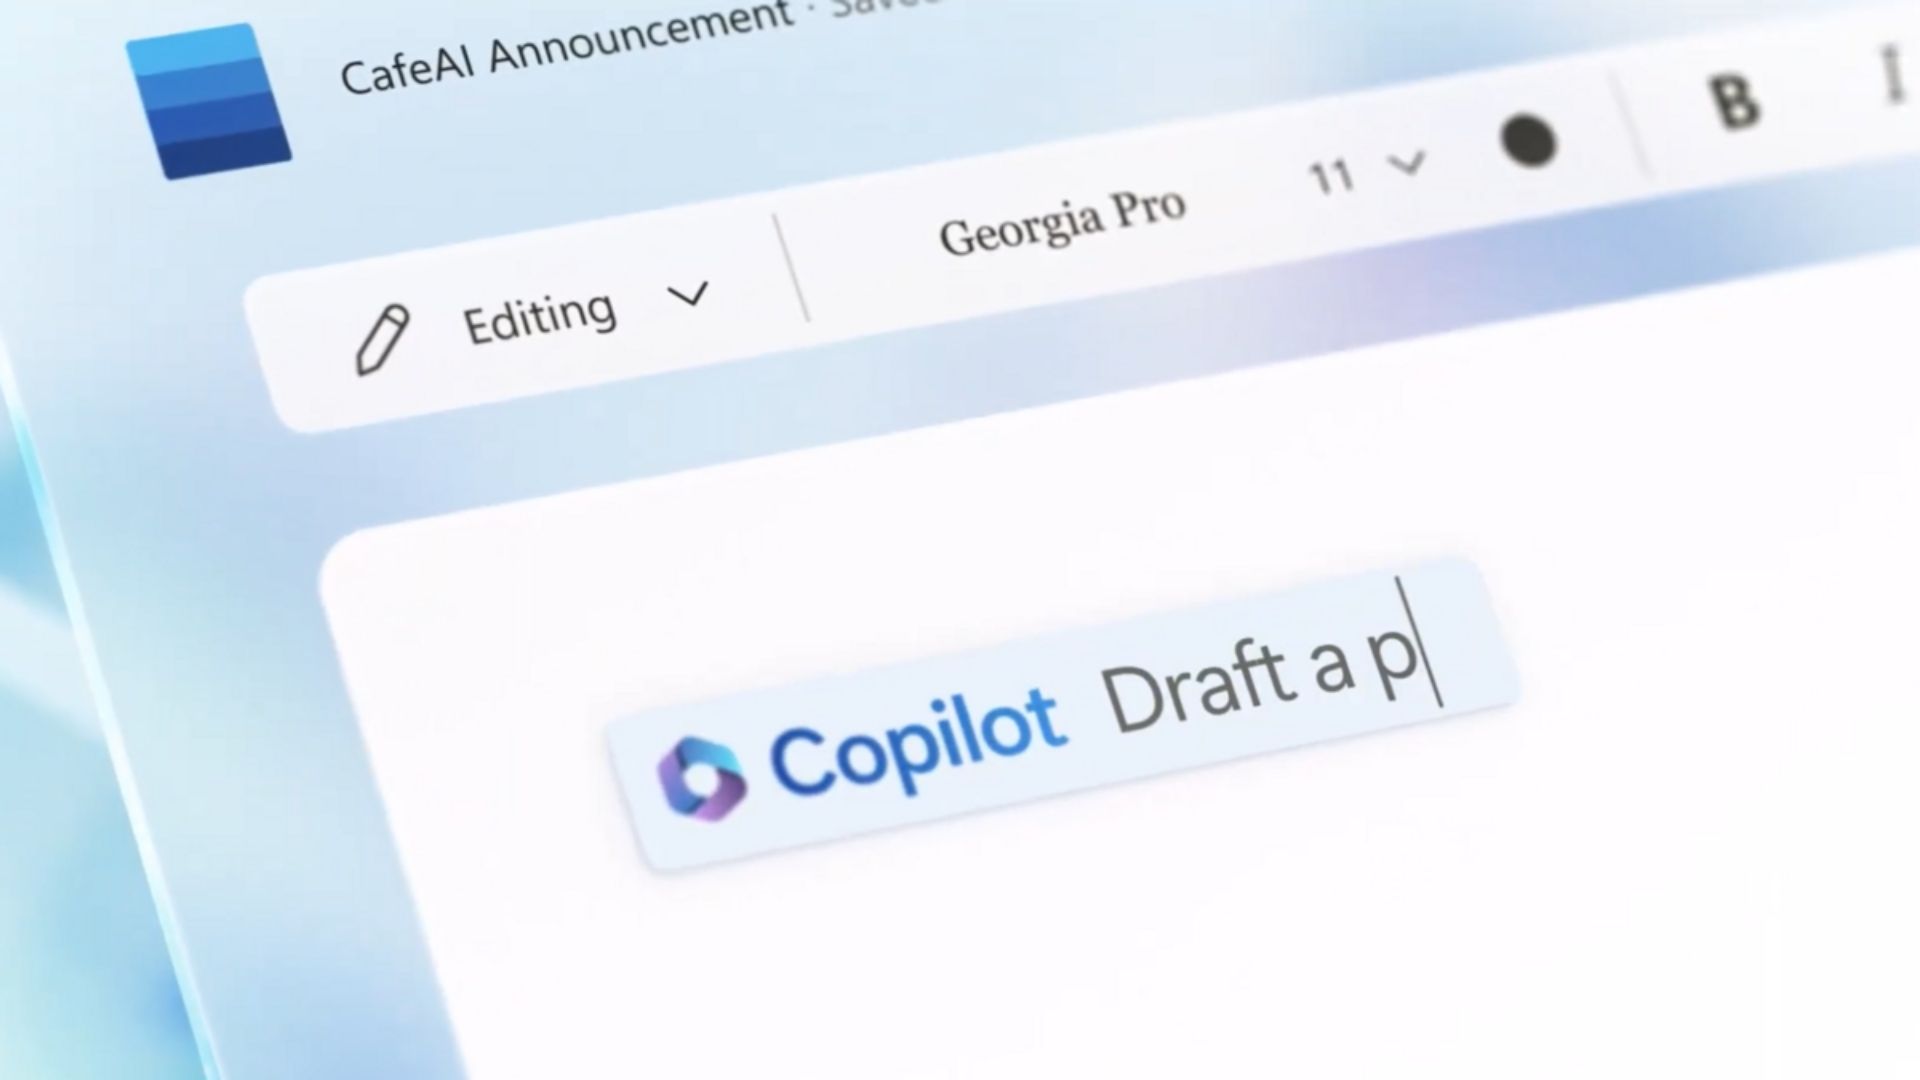 How to use Copilot in Word